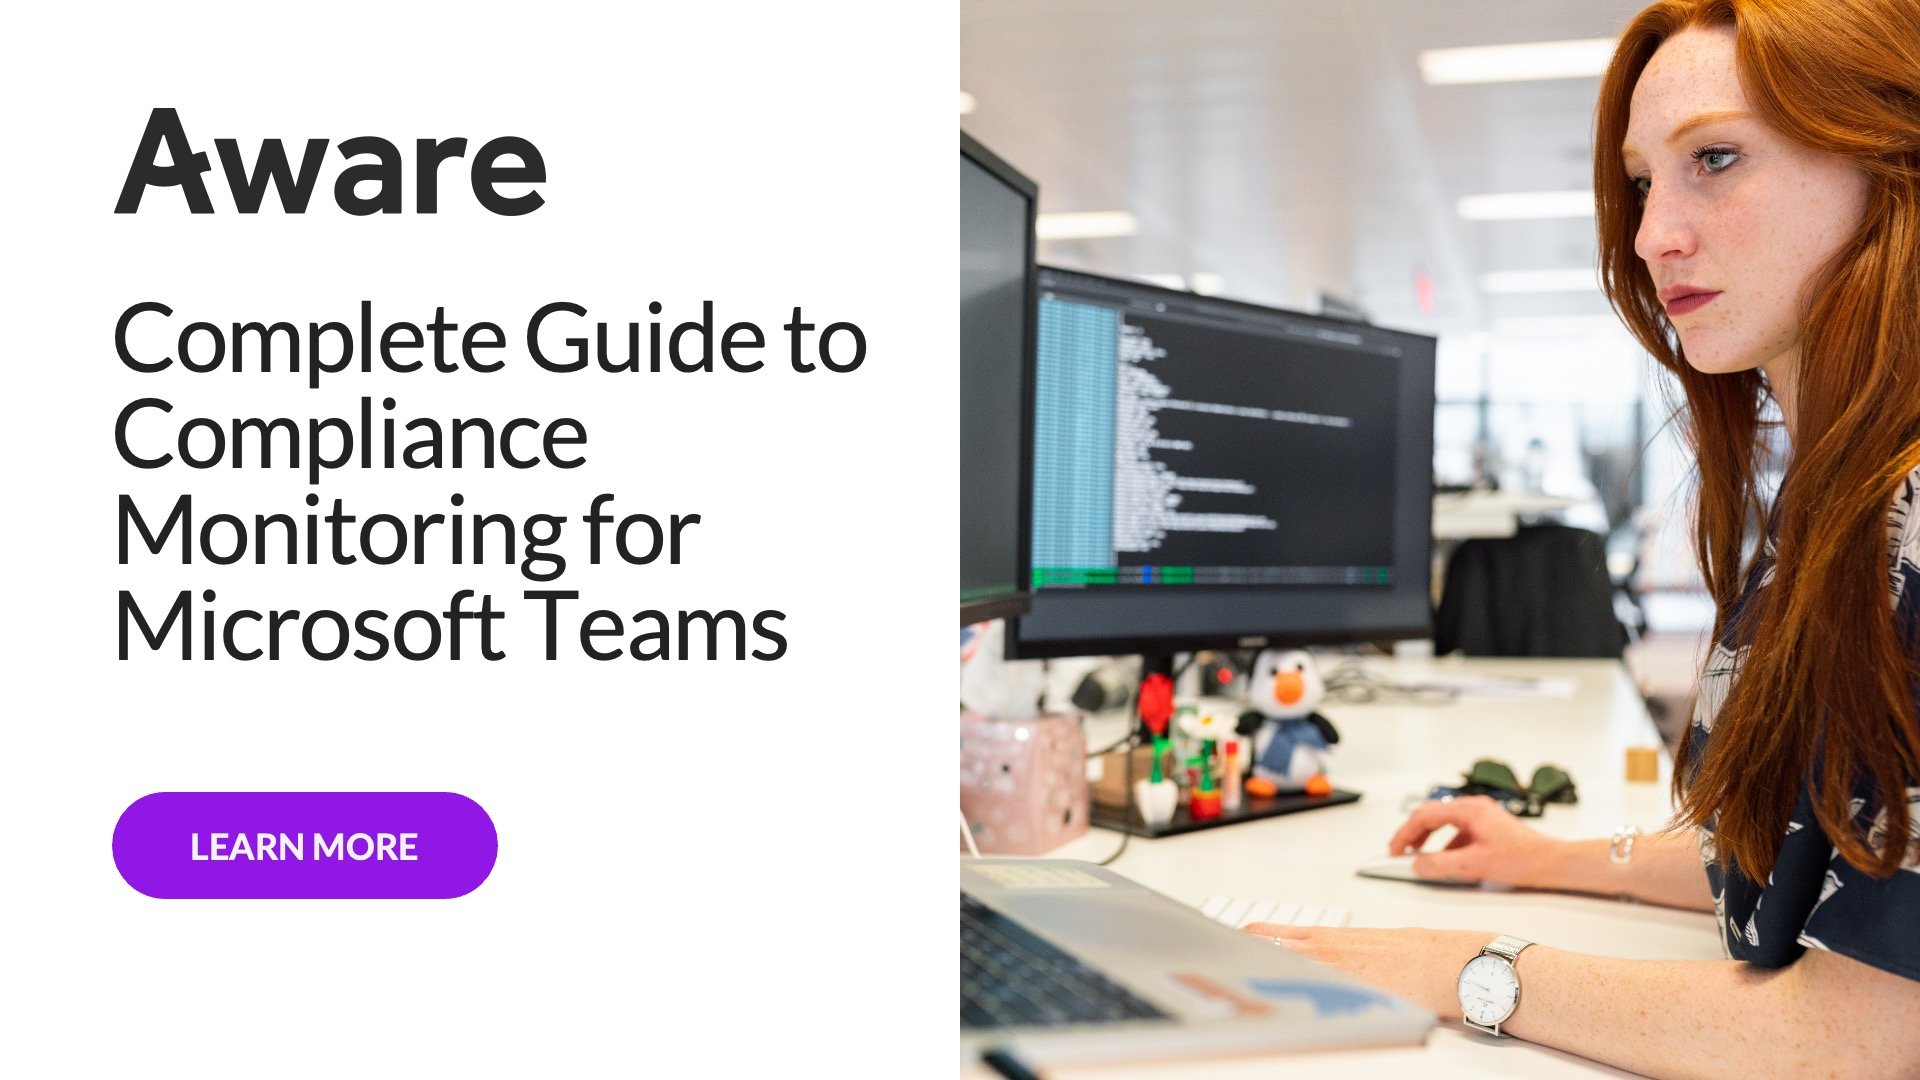 Complete Guide to Compliance Monitoring for Microsoft Teams